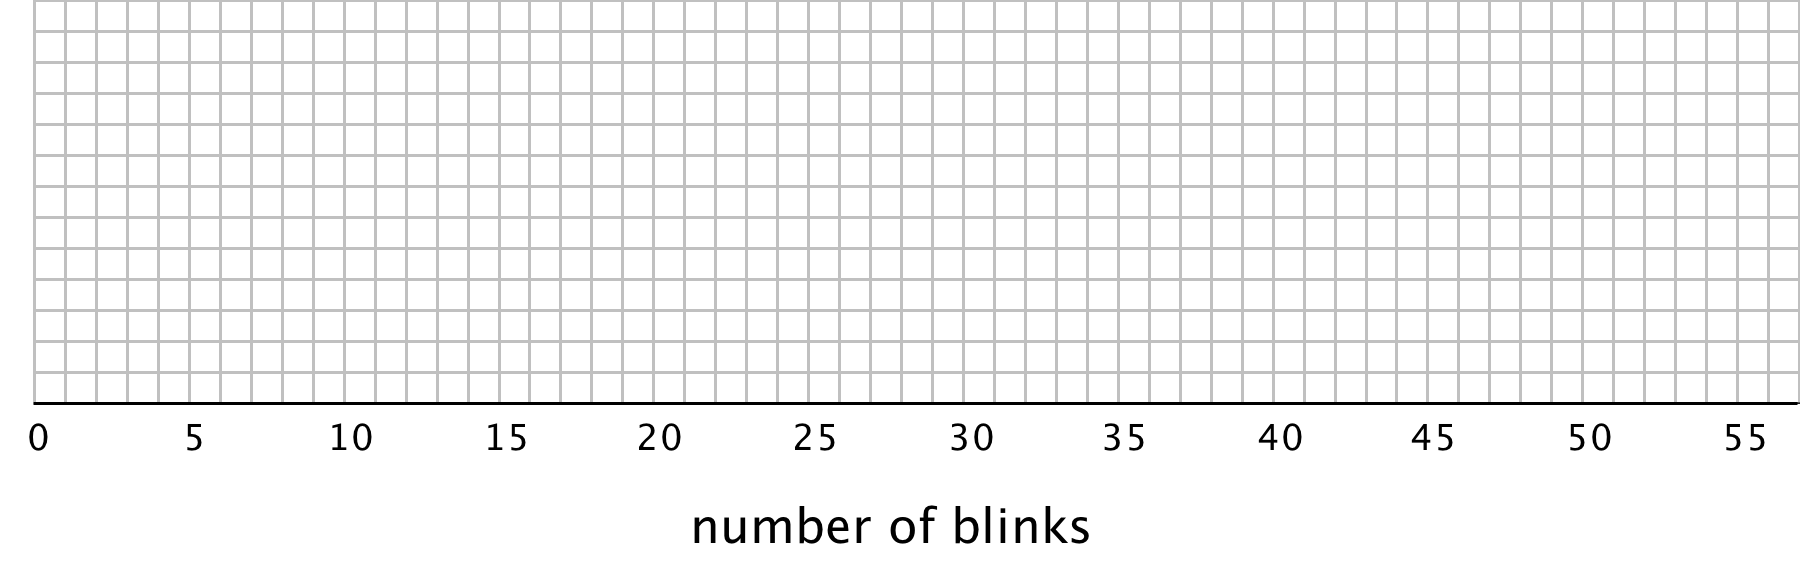 A blank grid for “number of blinks” with the numbers 0 through 55, in increments of 5 indicated along the horizontal axis. Between each number indicated there are 4 evenly spaced vertical gridlines. There are 13 horizontal gridlines.